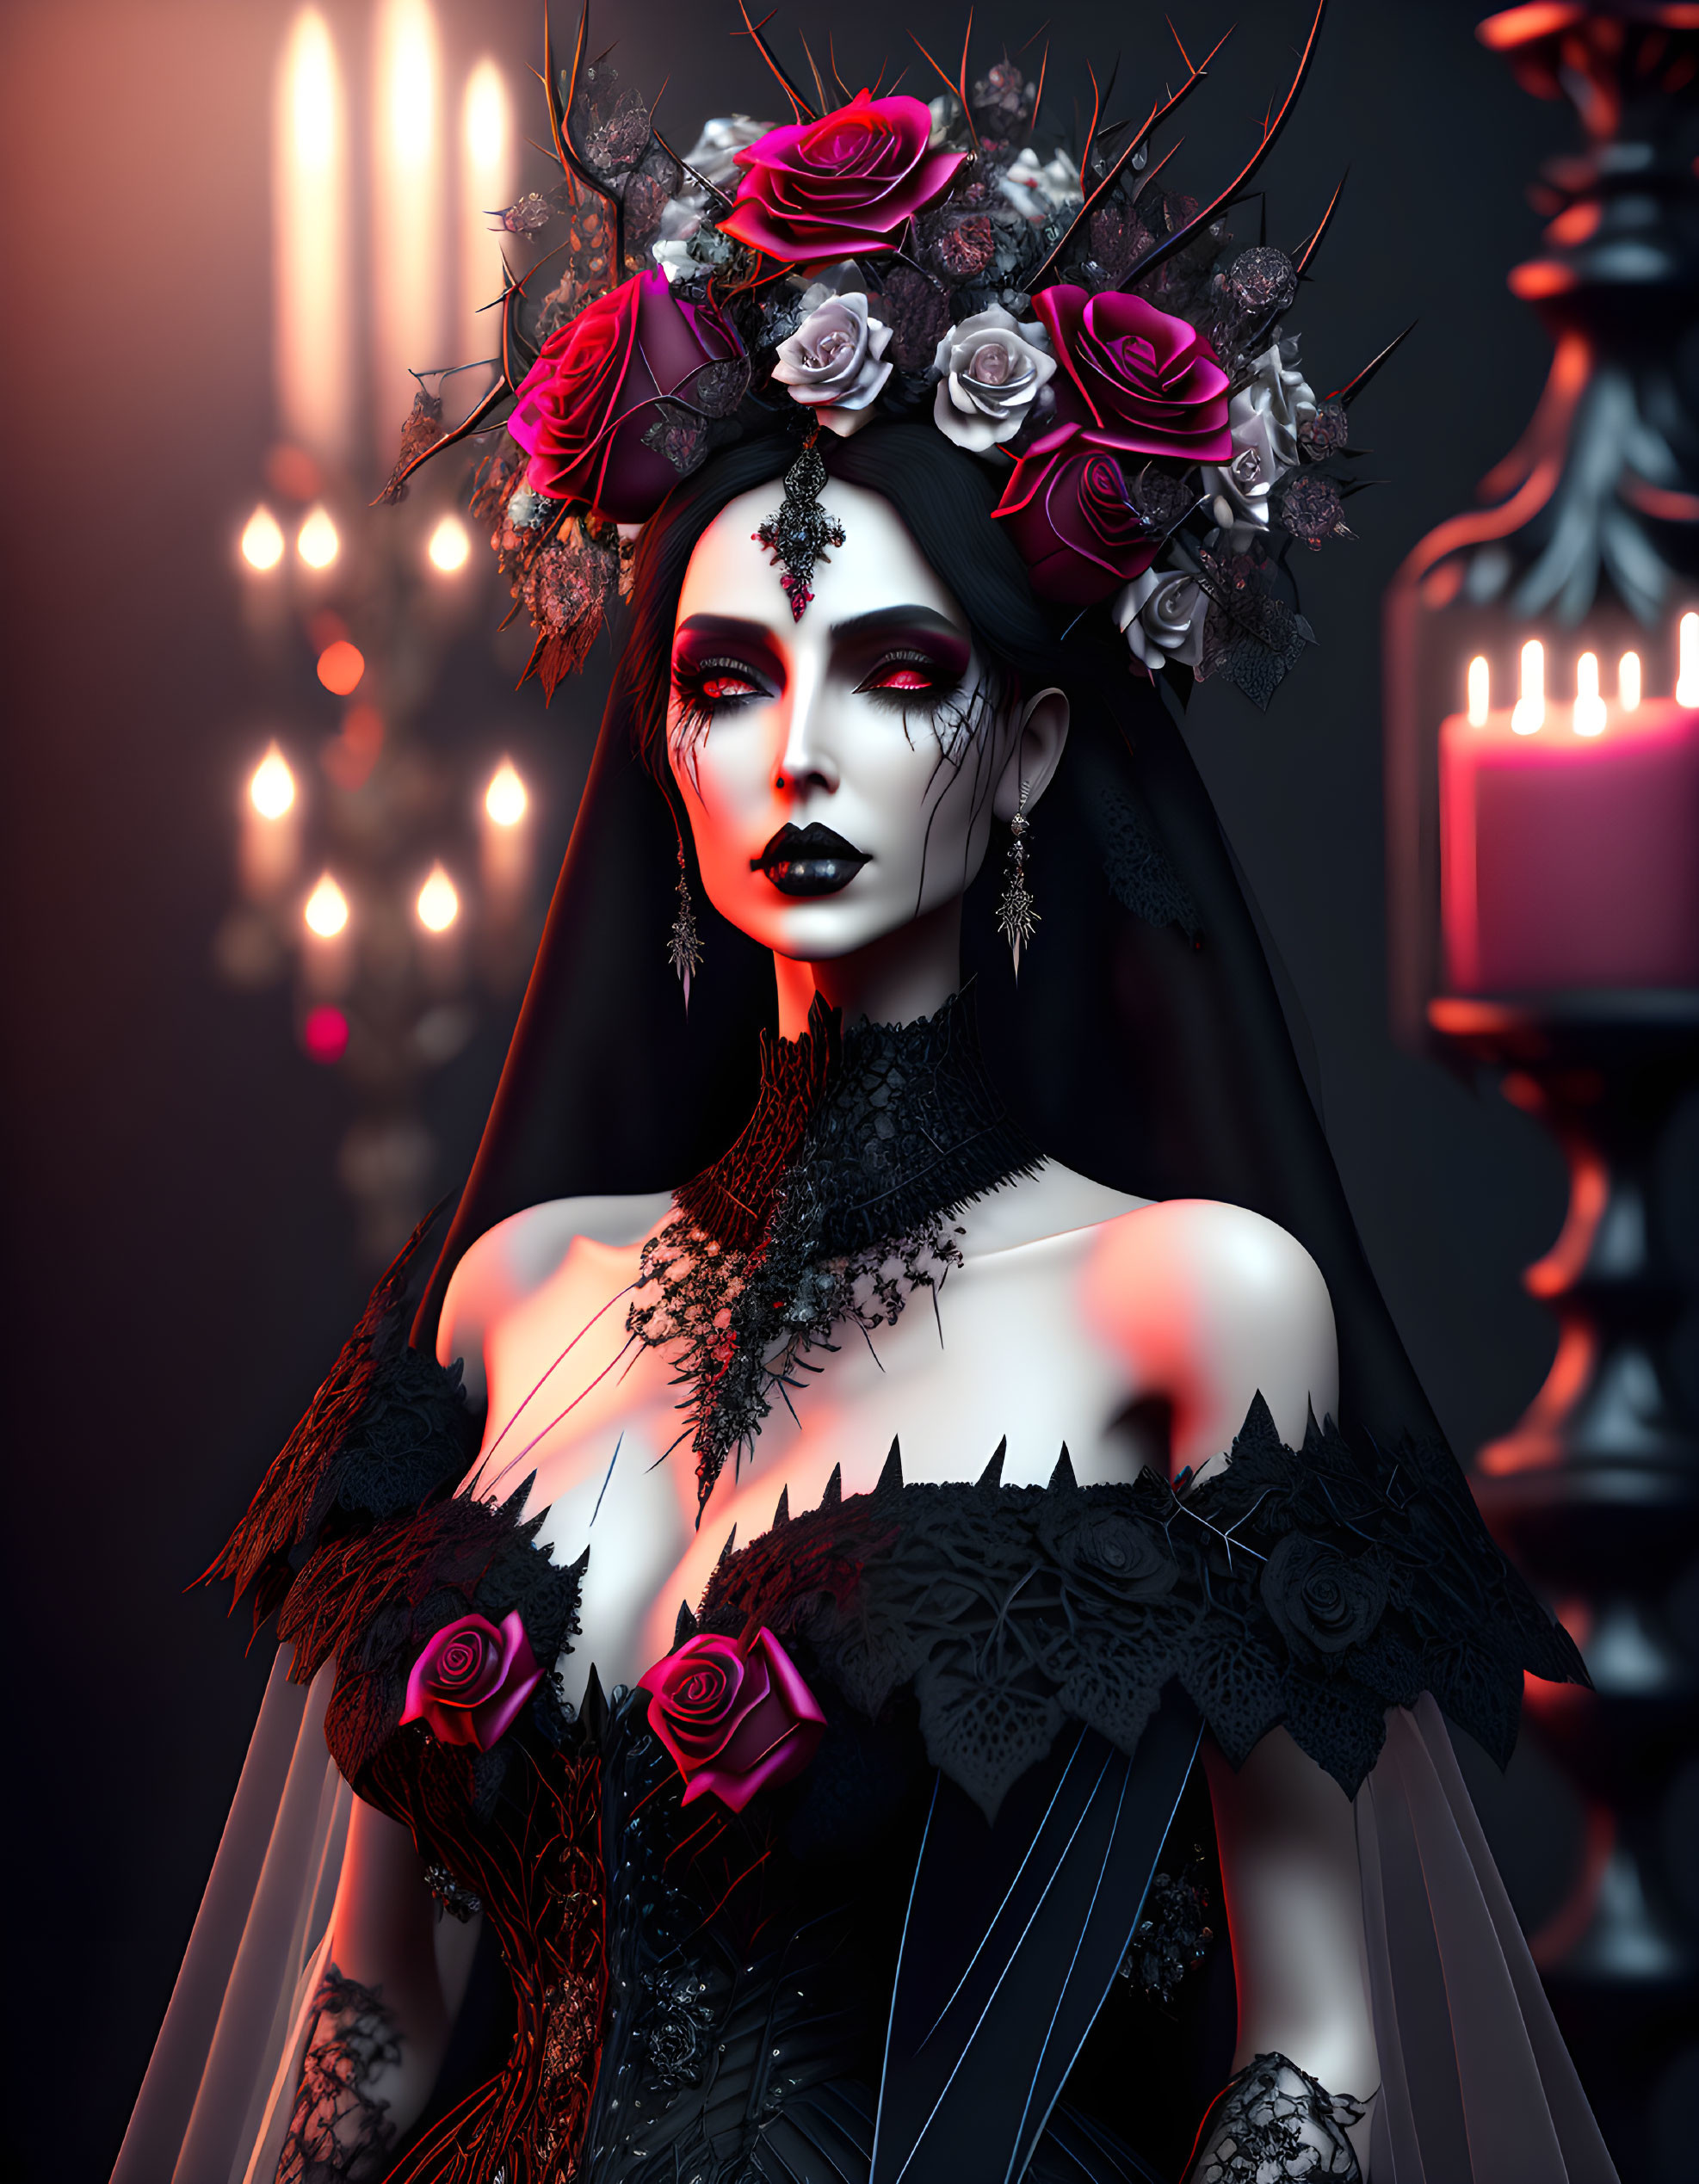 Gothic woman with rose crown in ornate black dress and dark makeup